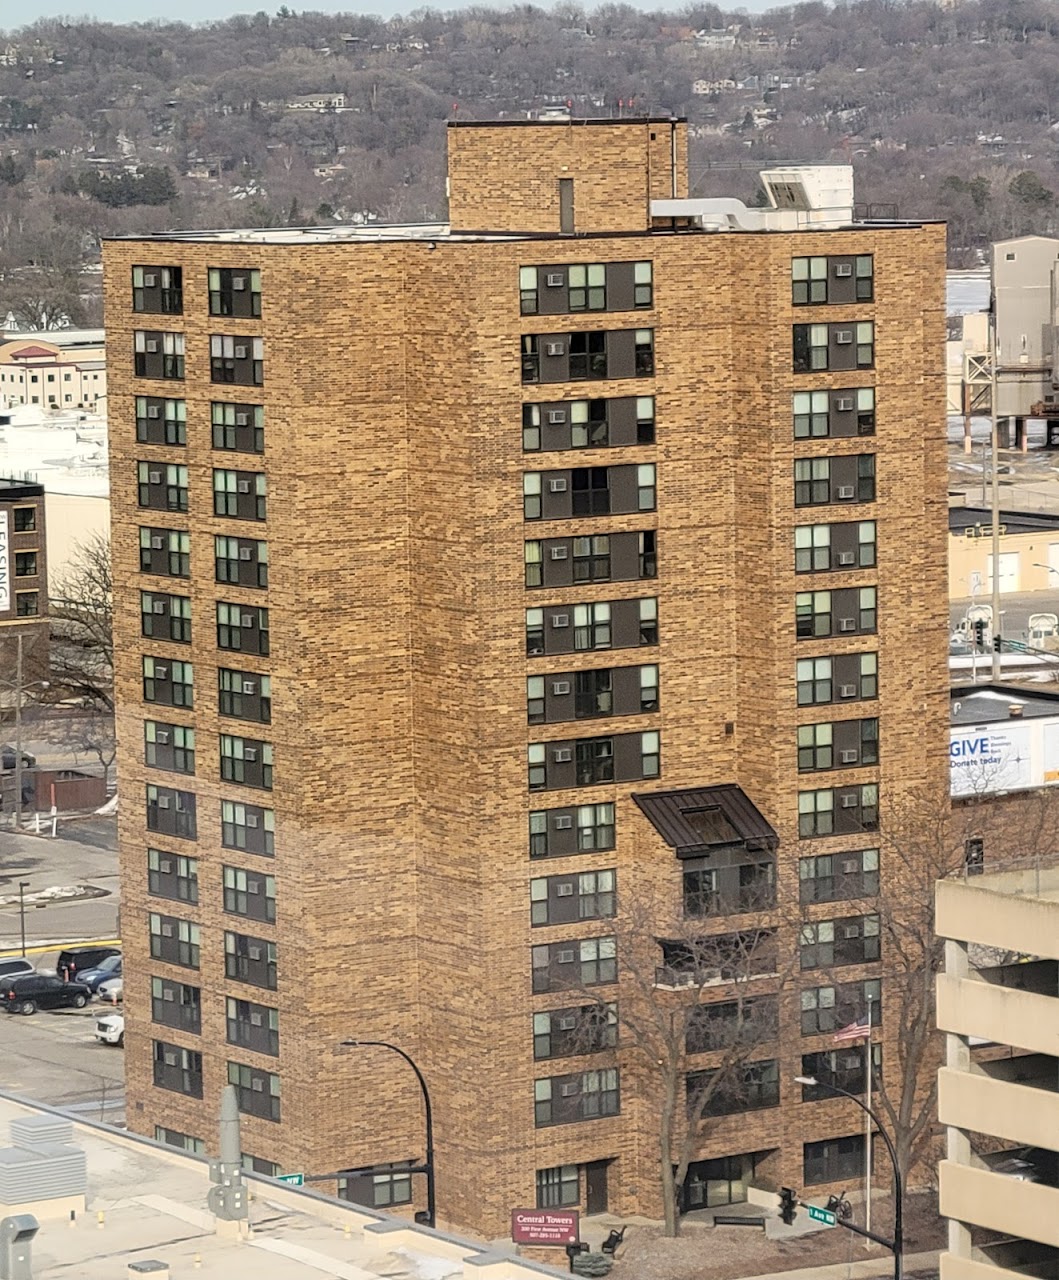 Photo of CENTRAL TOWERS. Affordable housing located at 200 1ST AVE NW ROCHESTER, MN 55901